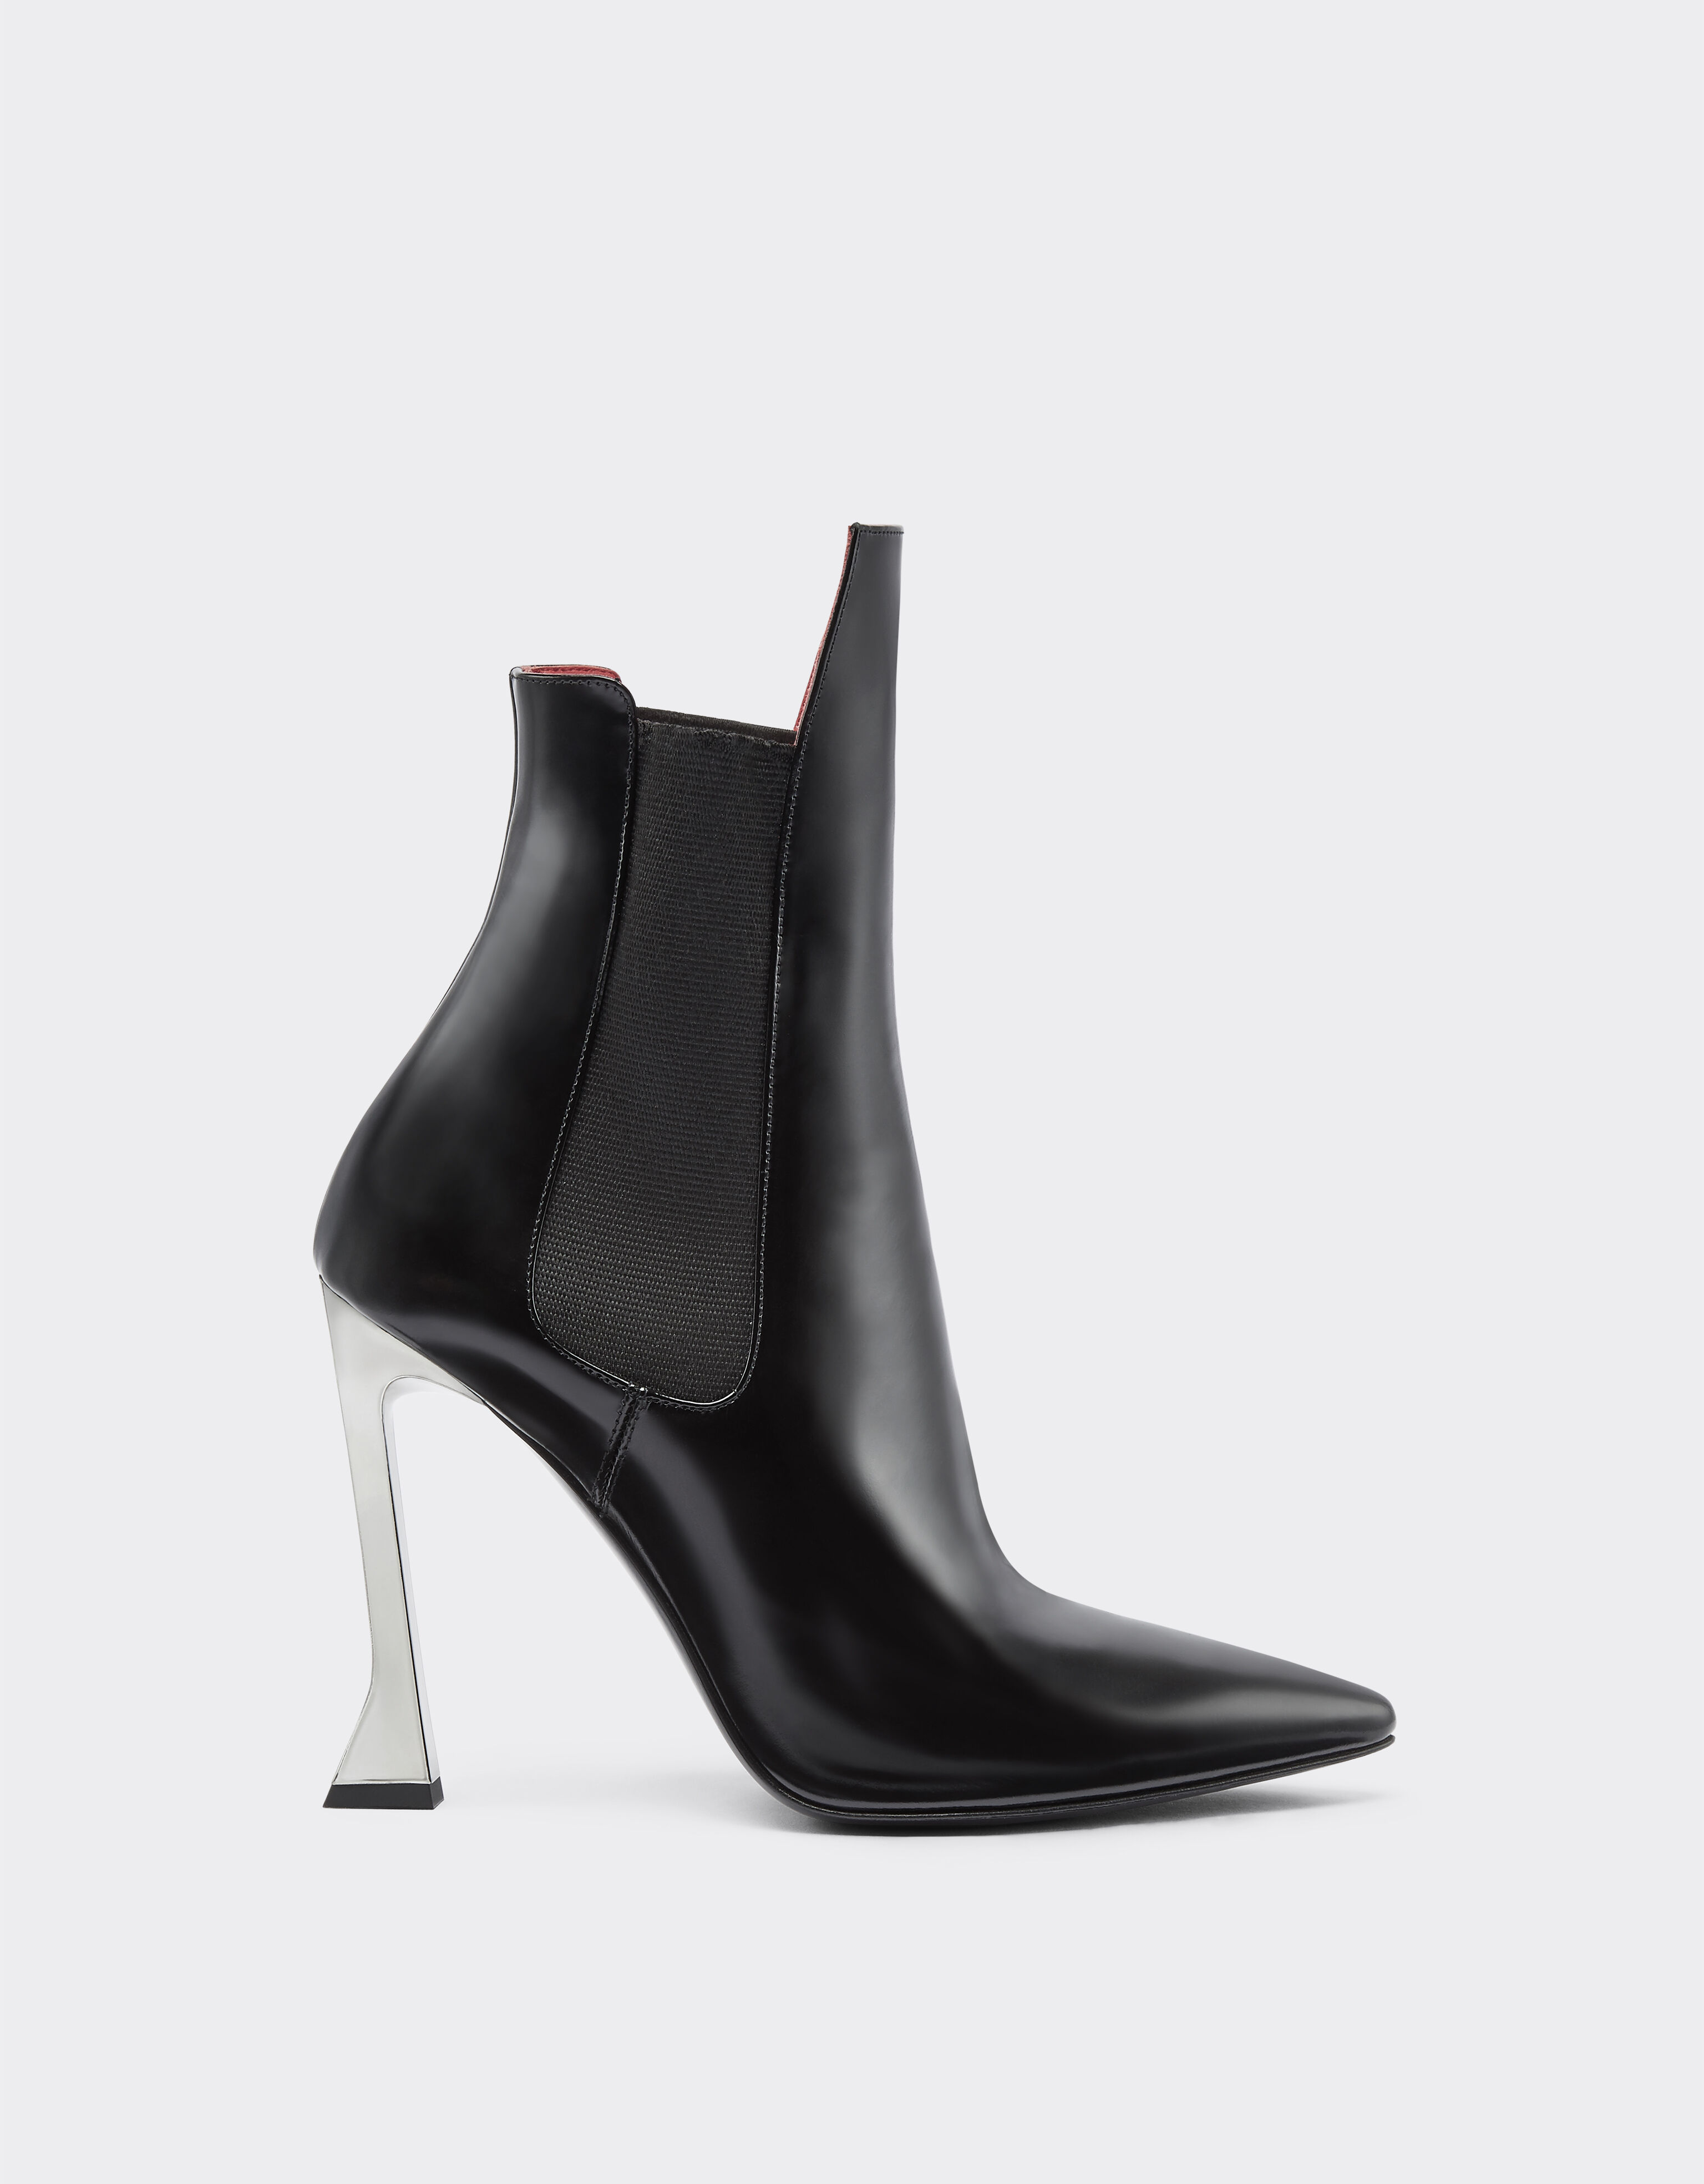 Ferrari Ankle boots in brushed leather Black 20410f